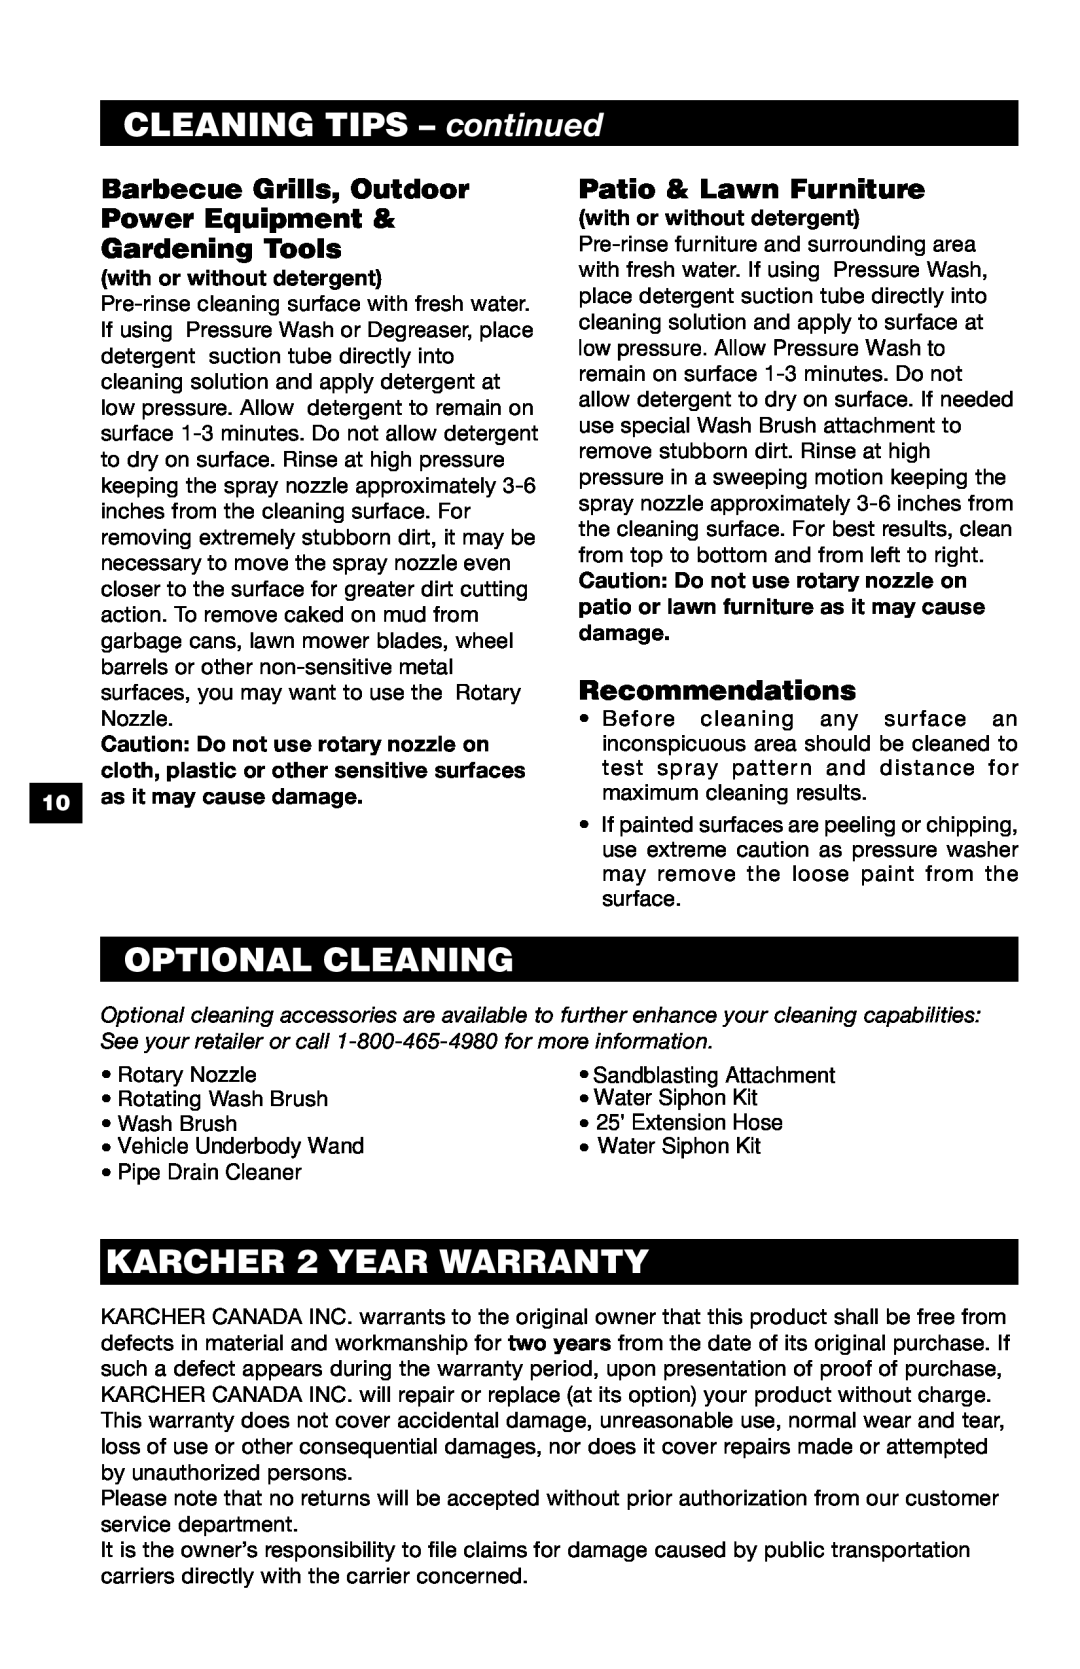 Karcher K 320 M CLEANING TIPS - continued, Optional Cleaning, KARCHER 2 YEAR WARRANTY, Patio & Lawn Furniture 